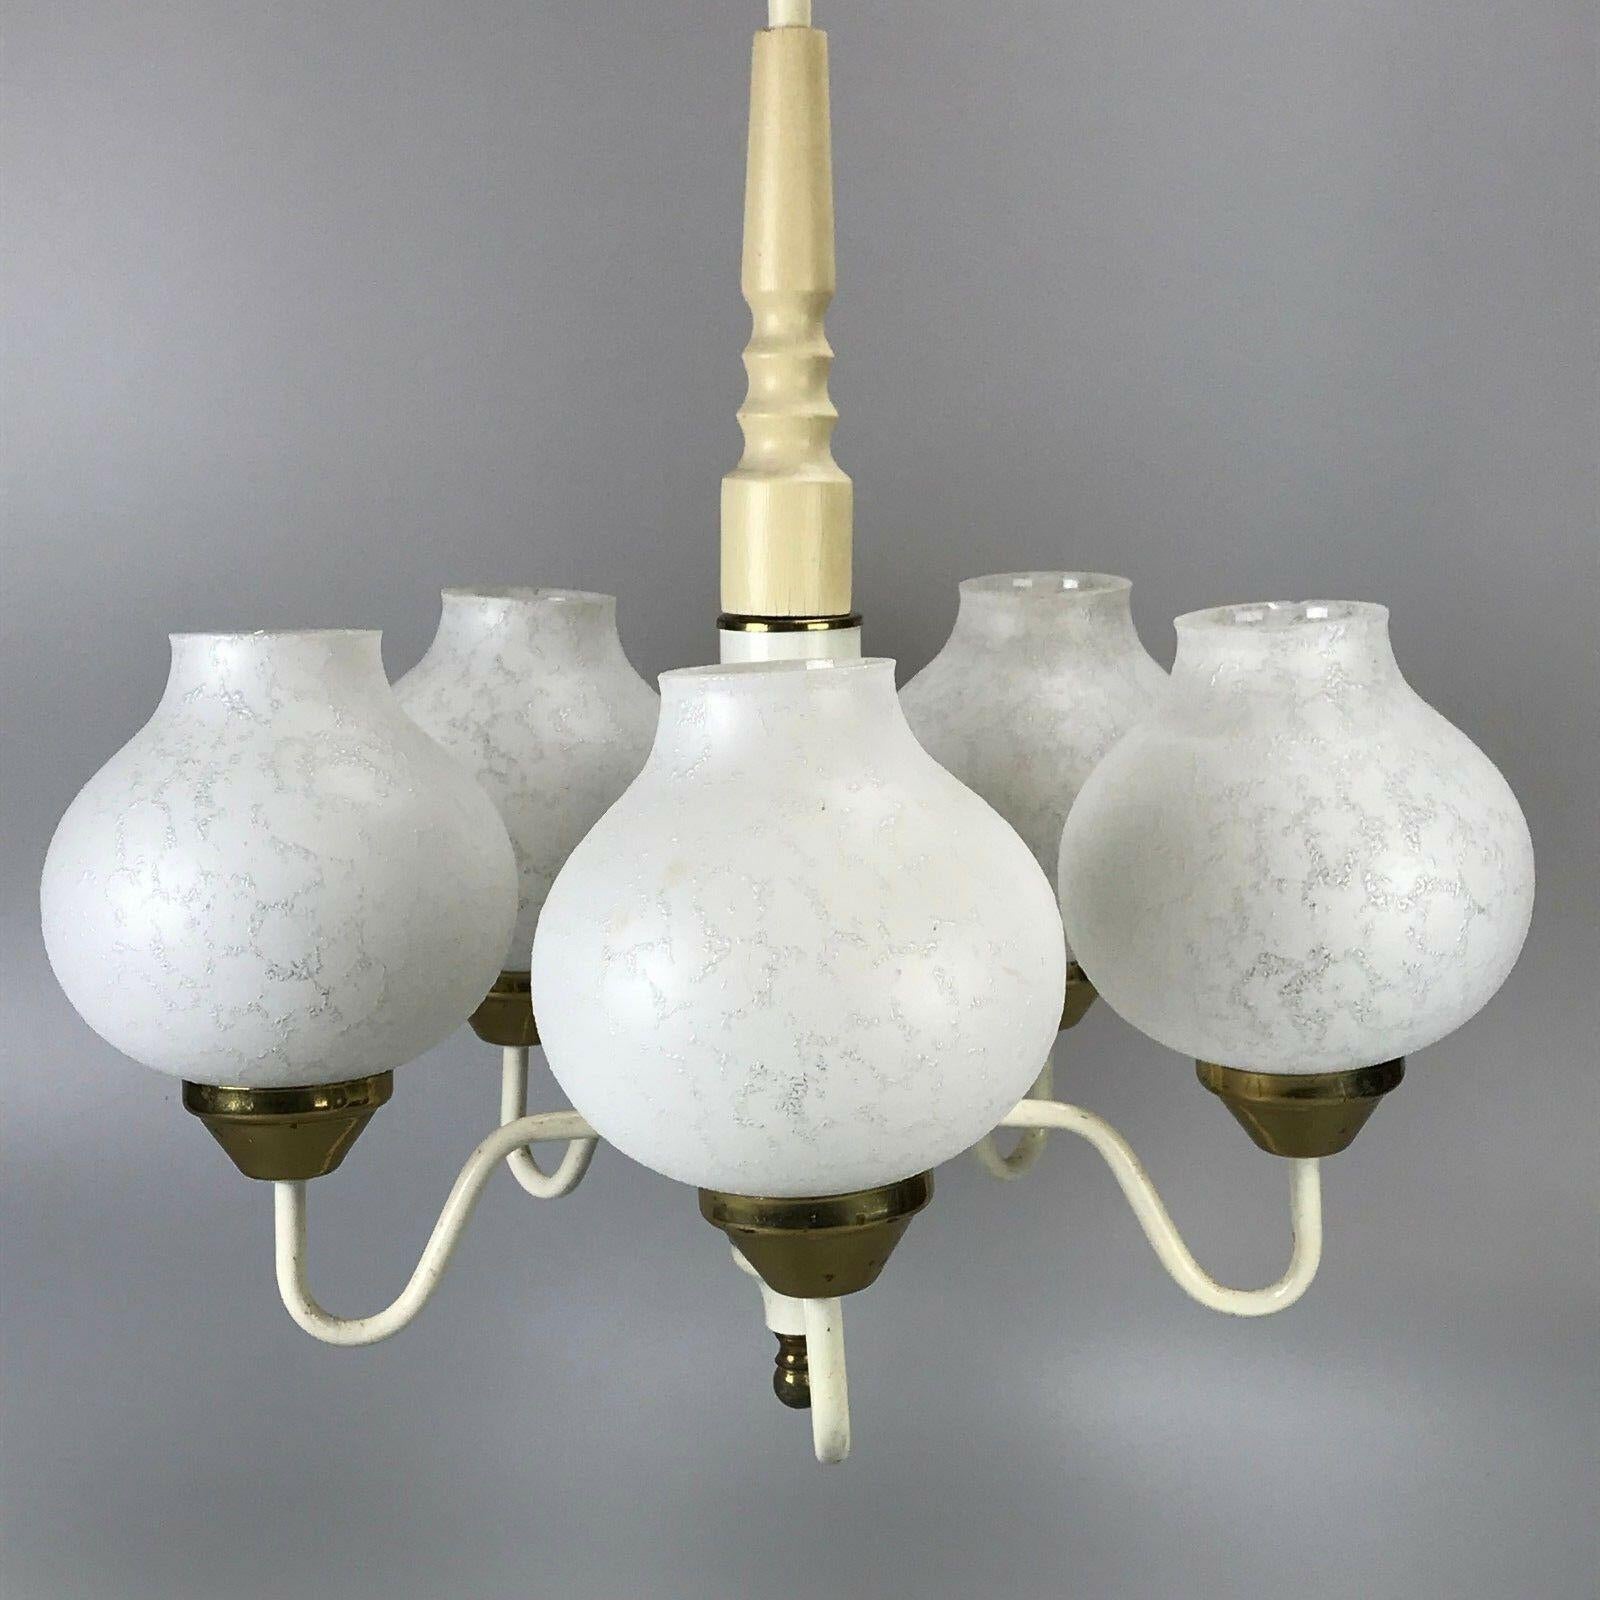 70's hanging lamps